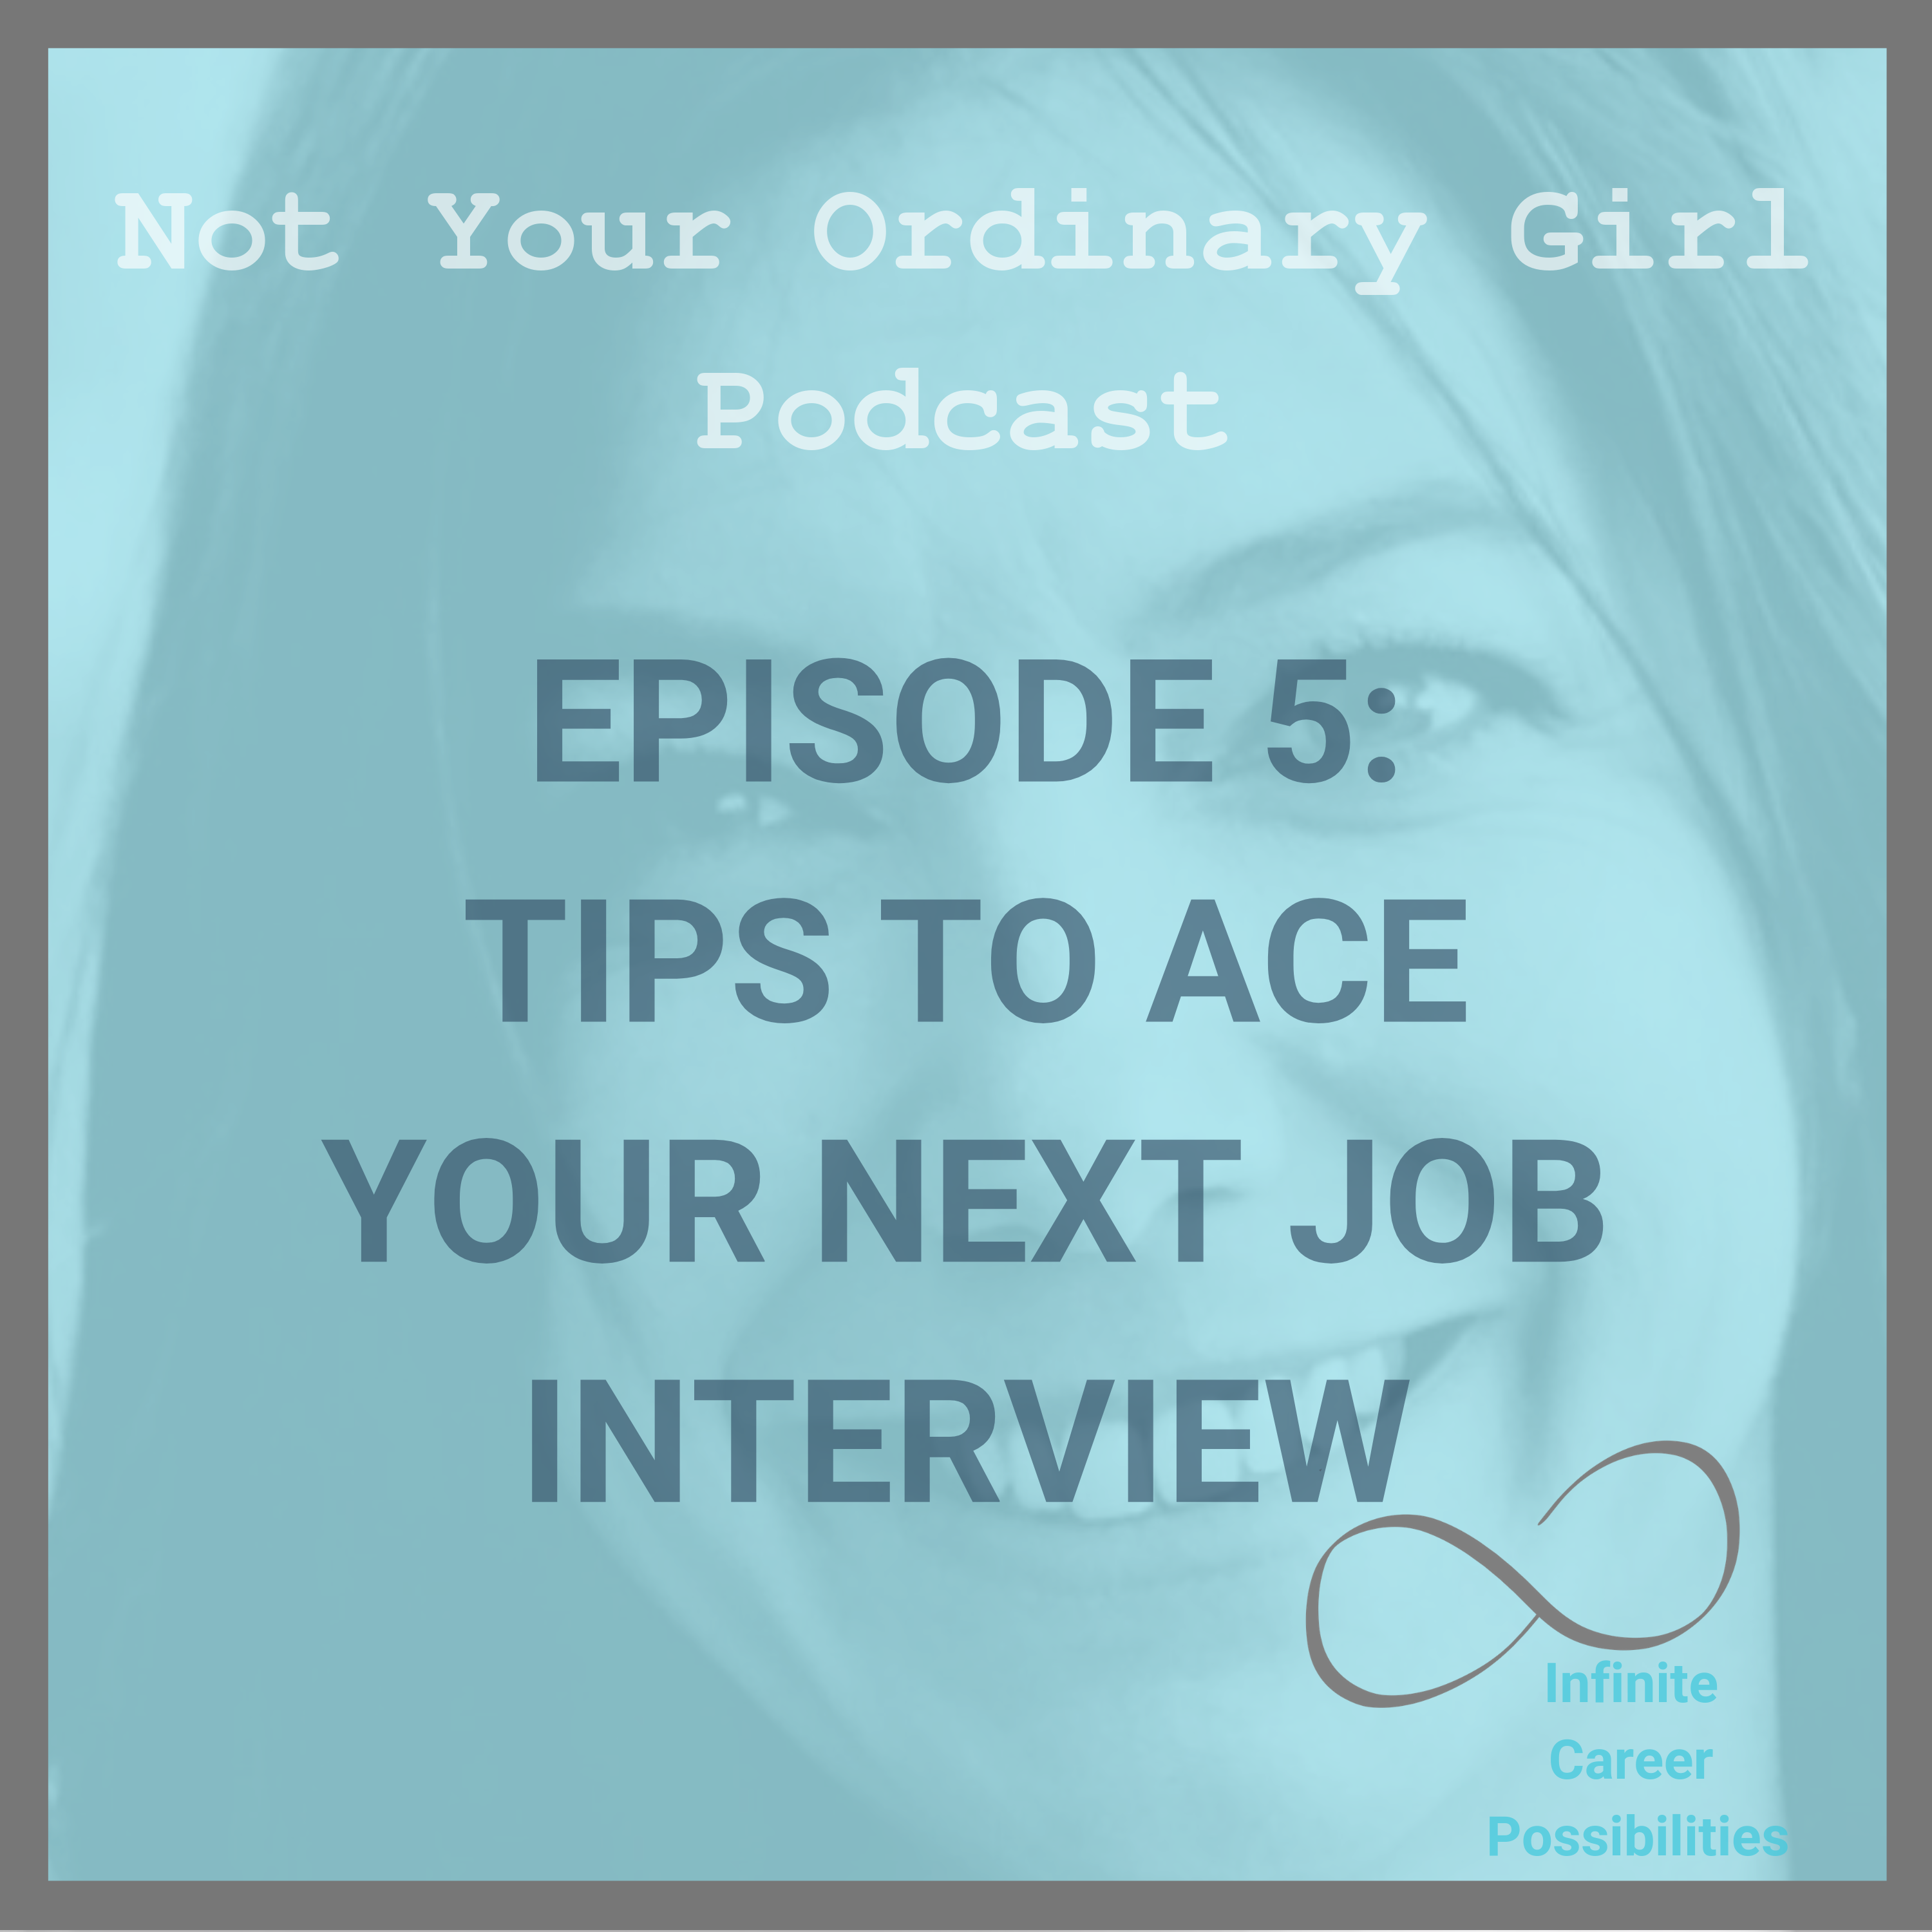 Tips to Ace Your Next Job Interview